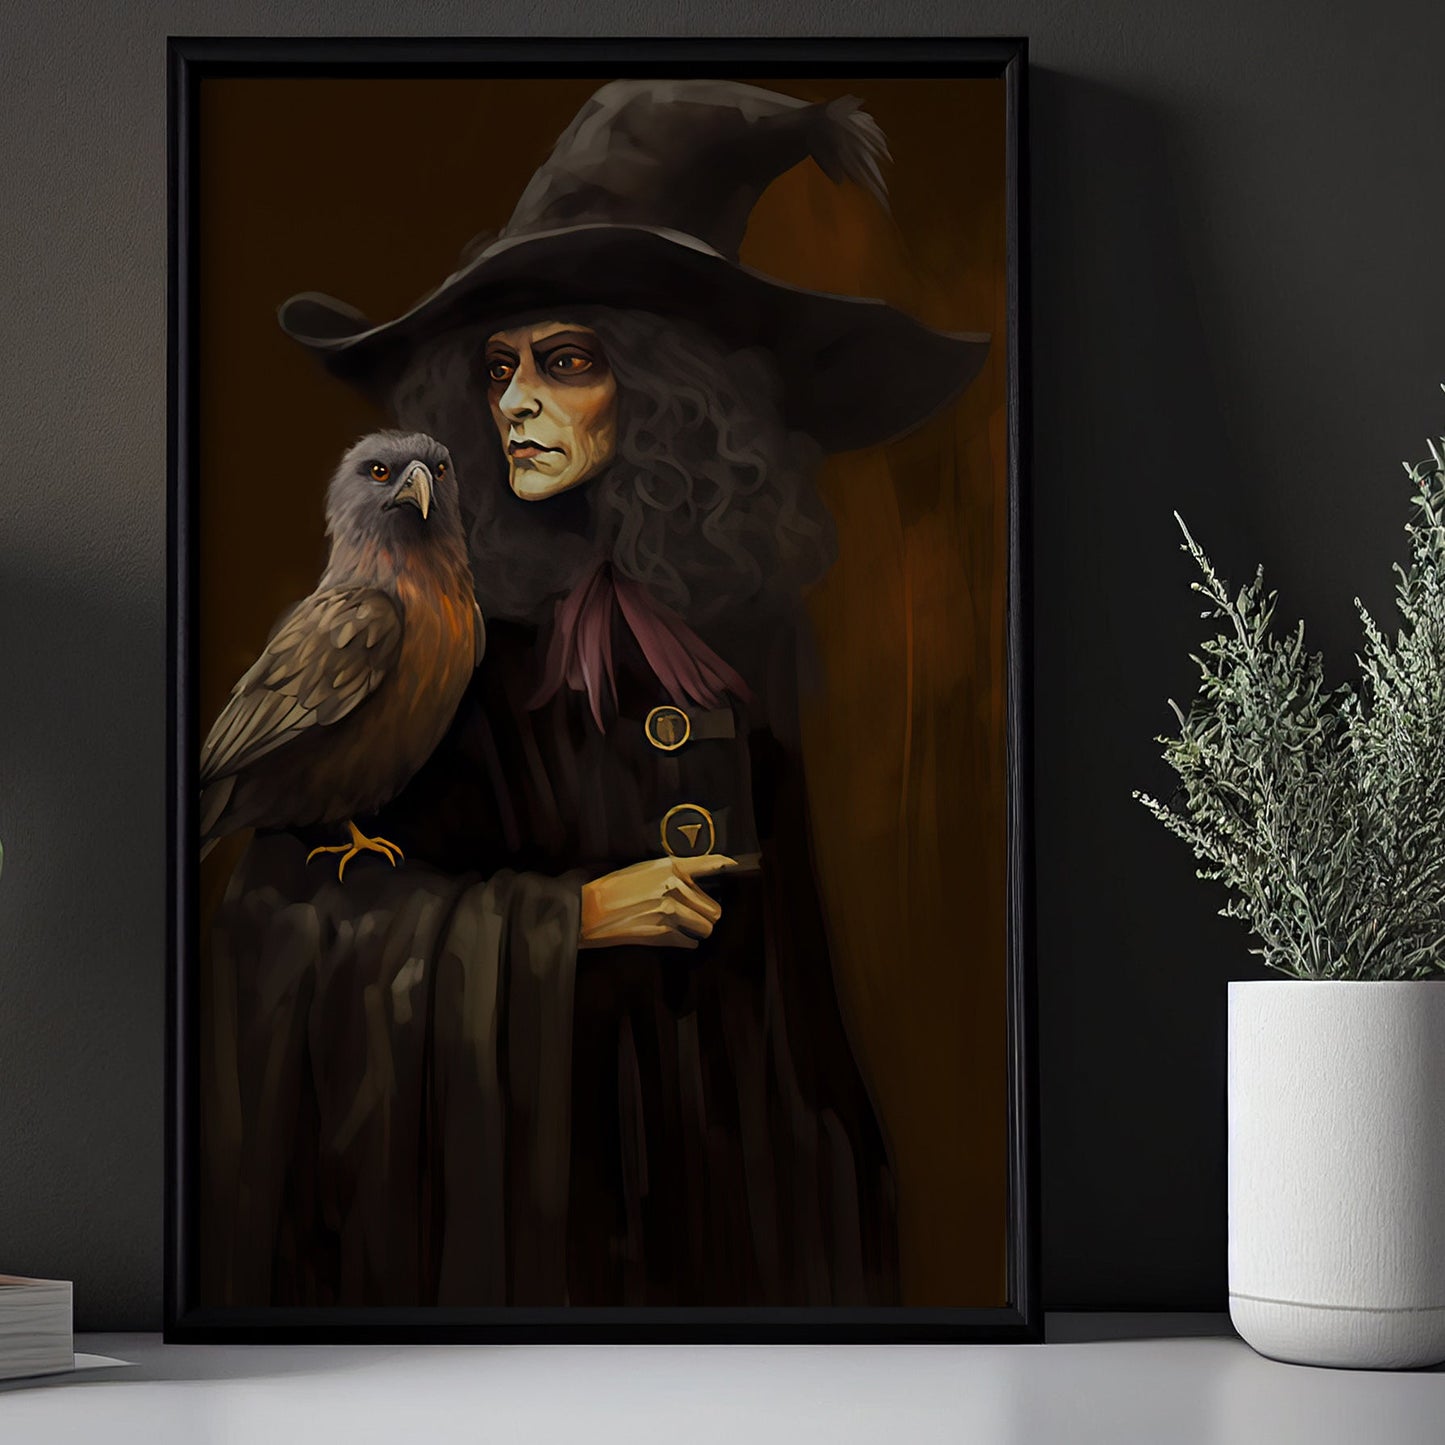 The Spooky Witch With Bird On Hand Painting Halloween Canvas Painting, Wall Art Decor - Halloween Poster Gift